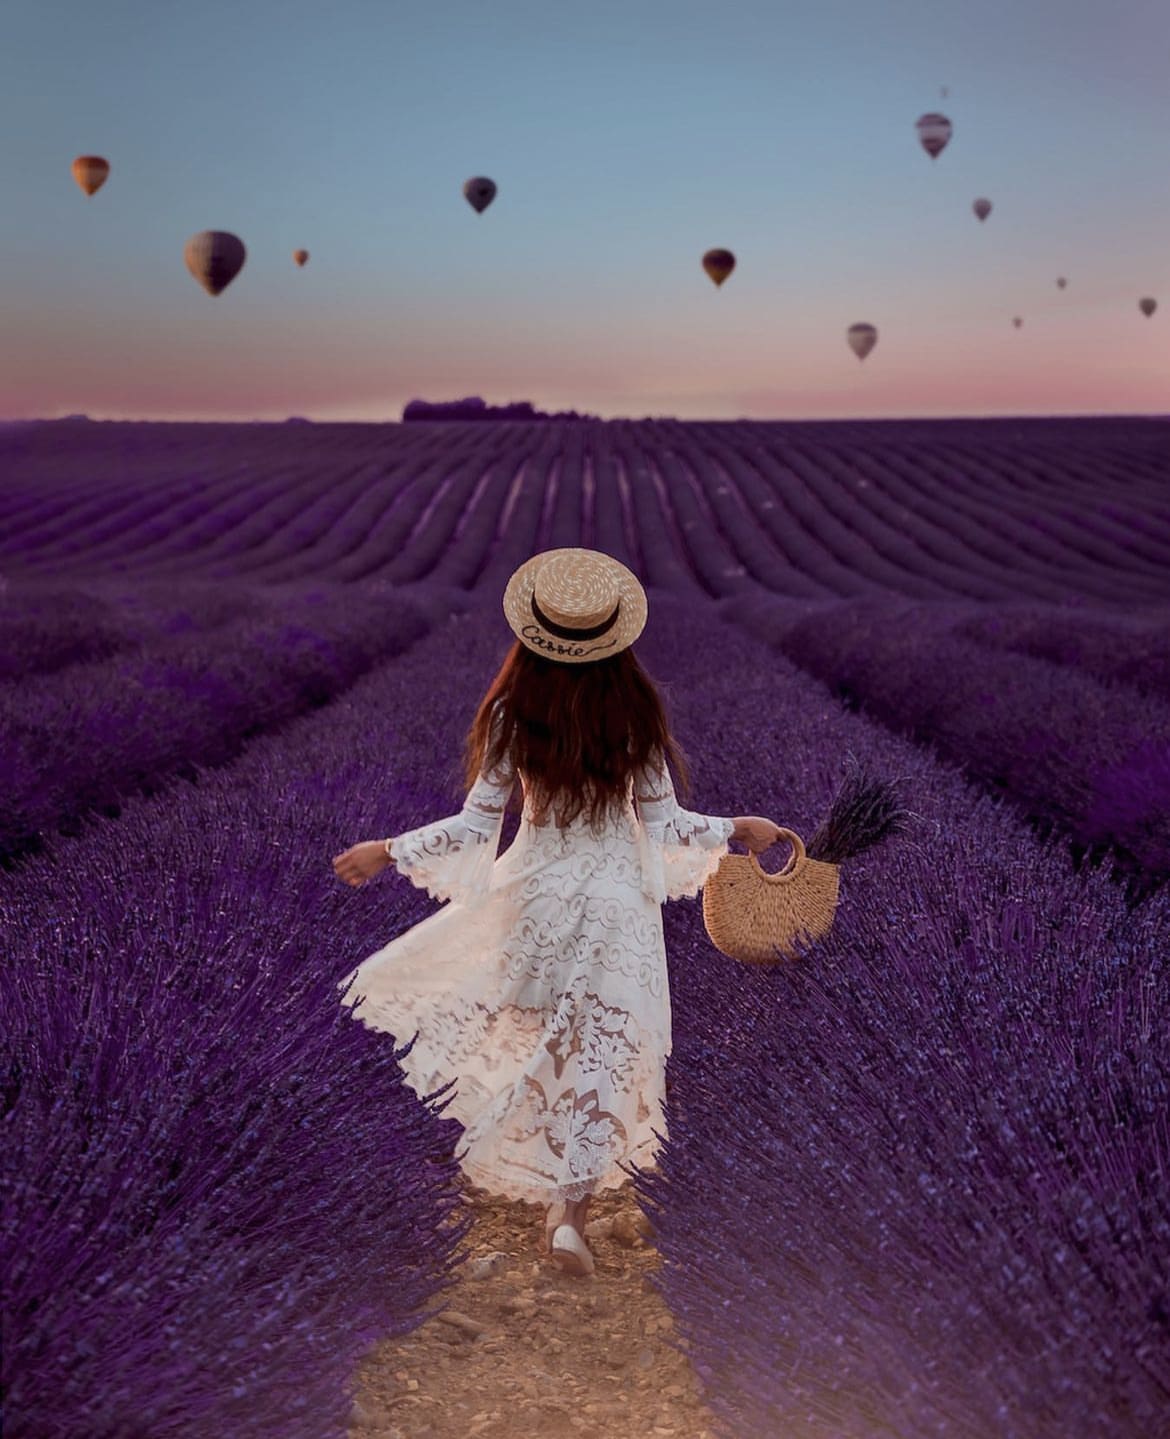 Valensole Plateau - The 10 Best Places to See Lavender Fields in Provence